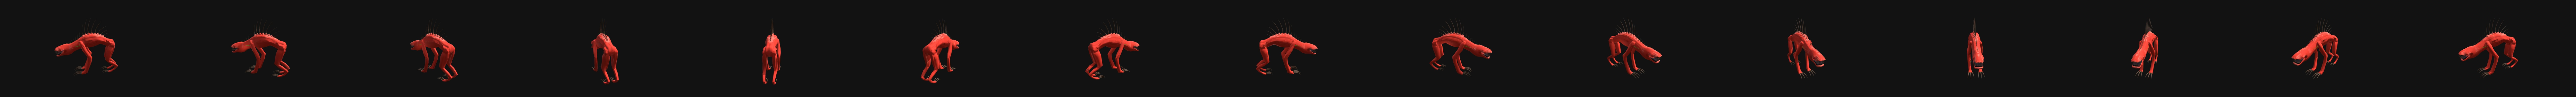 SCP-939 - 3D model by SmodelMaker (@Hgmg) [54652c2]